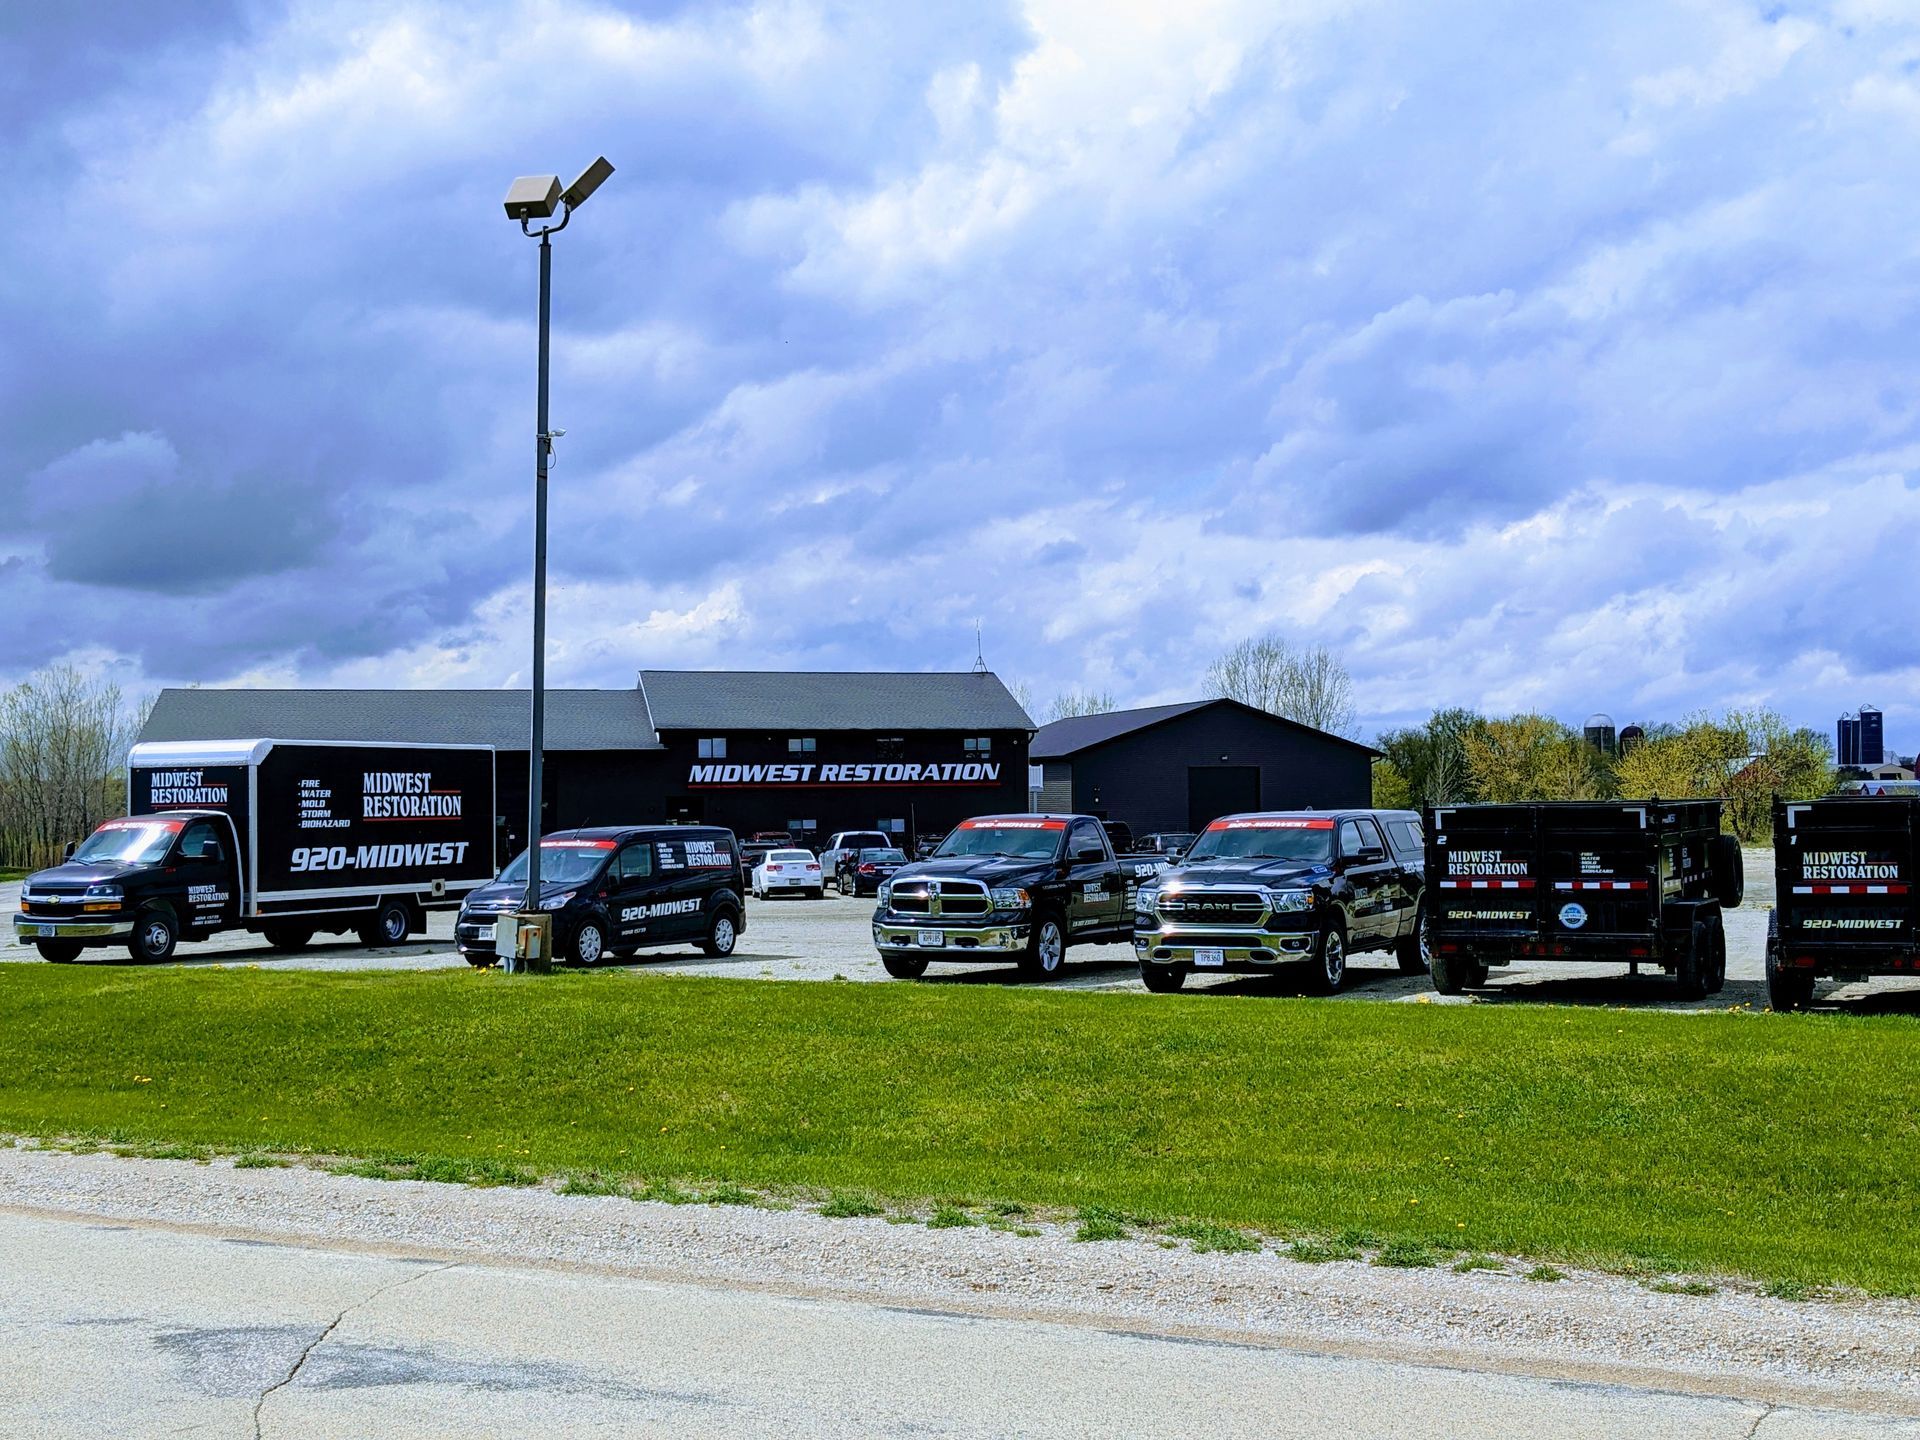 A row of trucks are parked in a parking lot in front of a building.